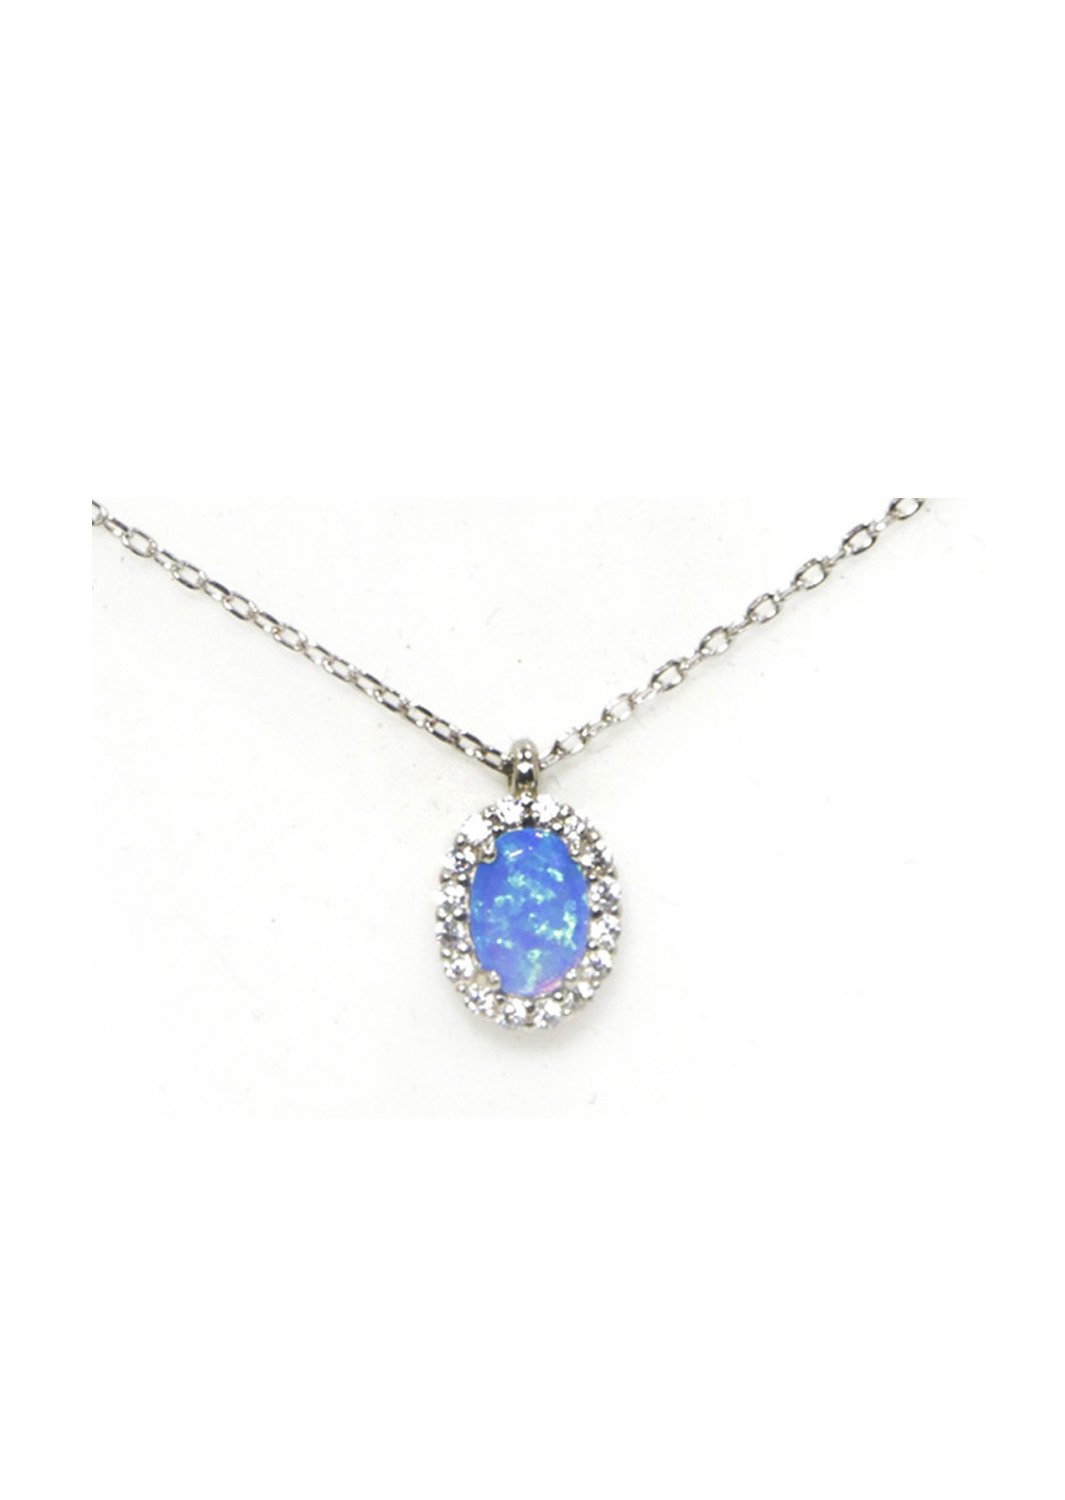 Opal pendant silver necklace with zircon